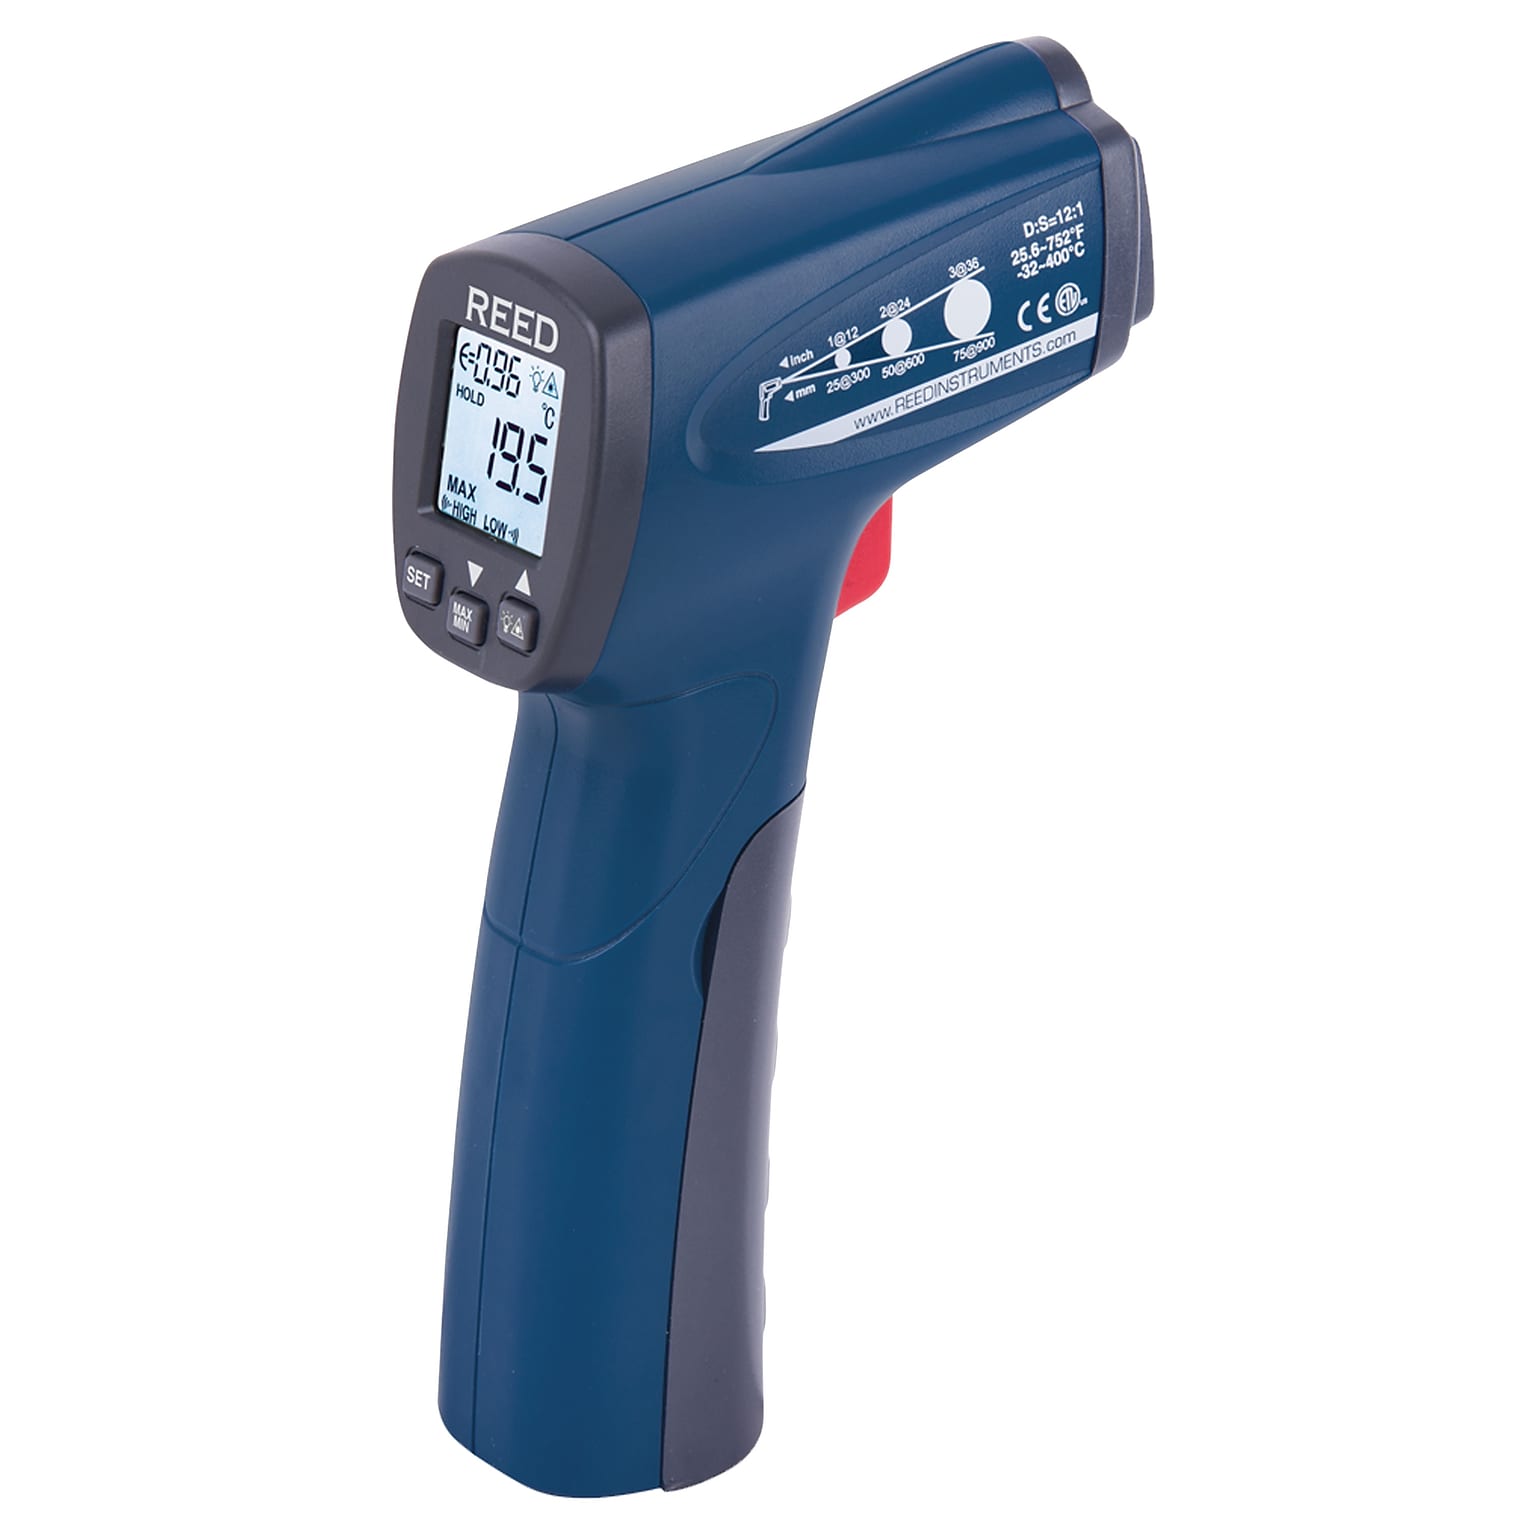 REED Instruments Infrared Thermometer, 12:1, 752°F (R2300)